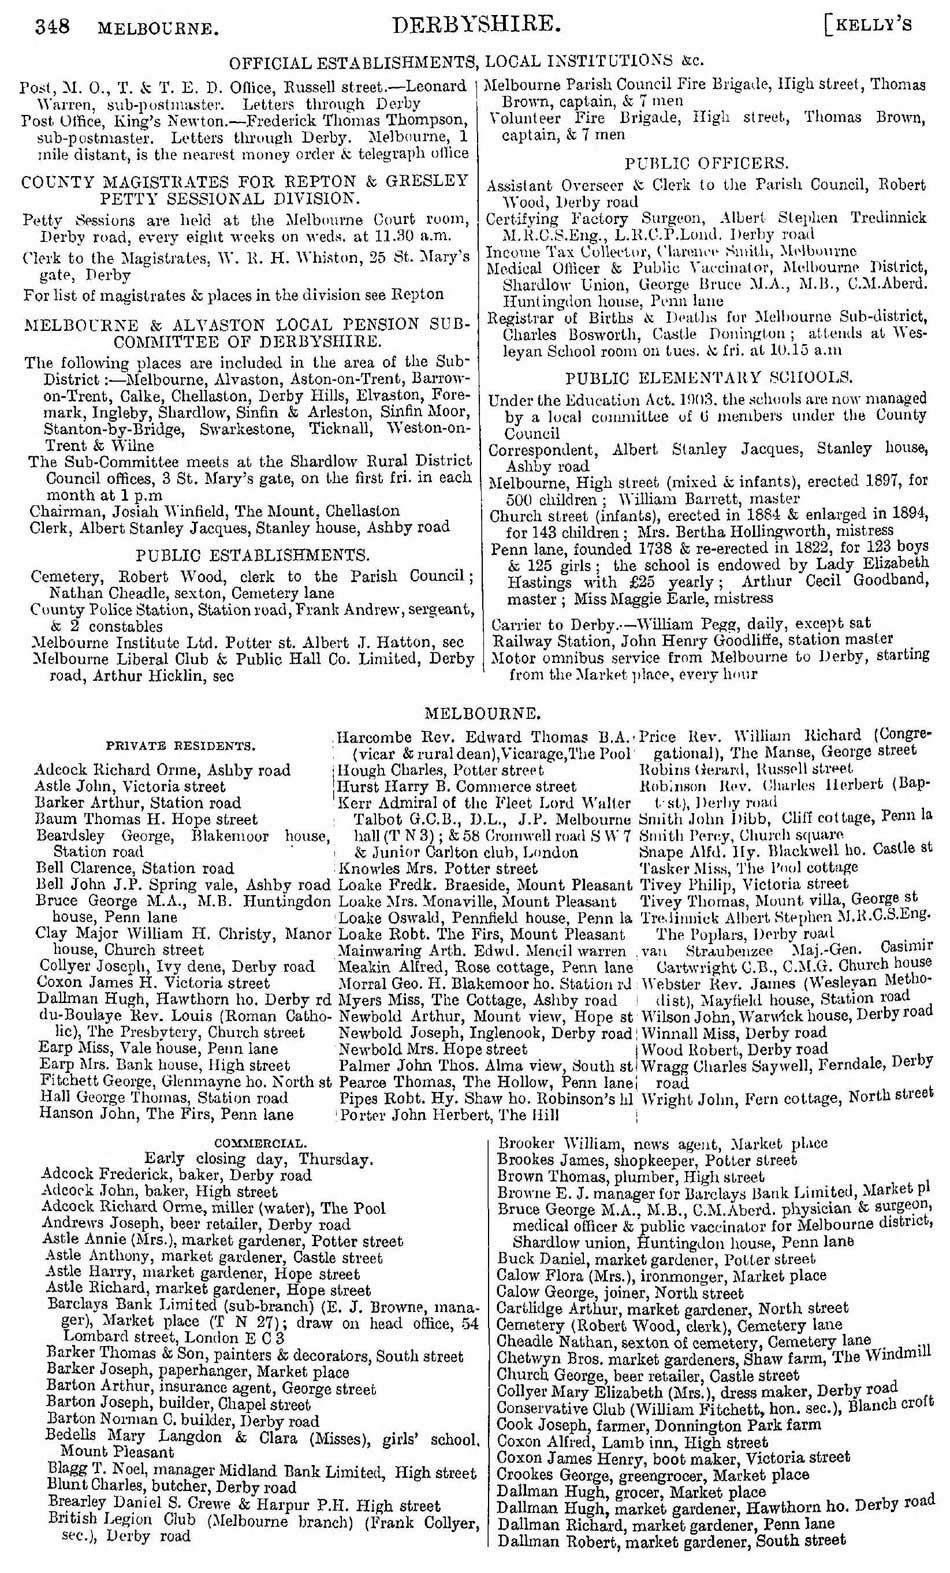 Kelly's-Directory-of-Melbourne-1925-Page-2